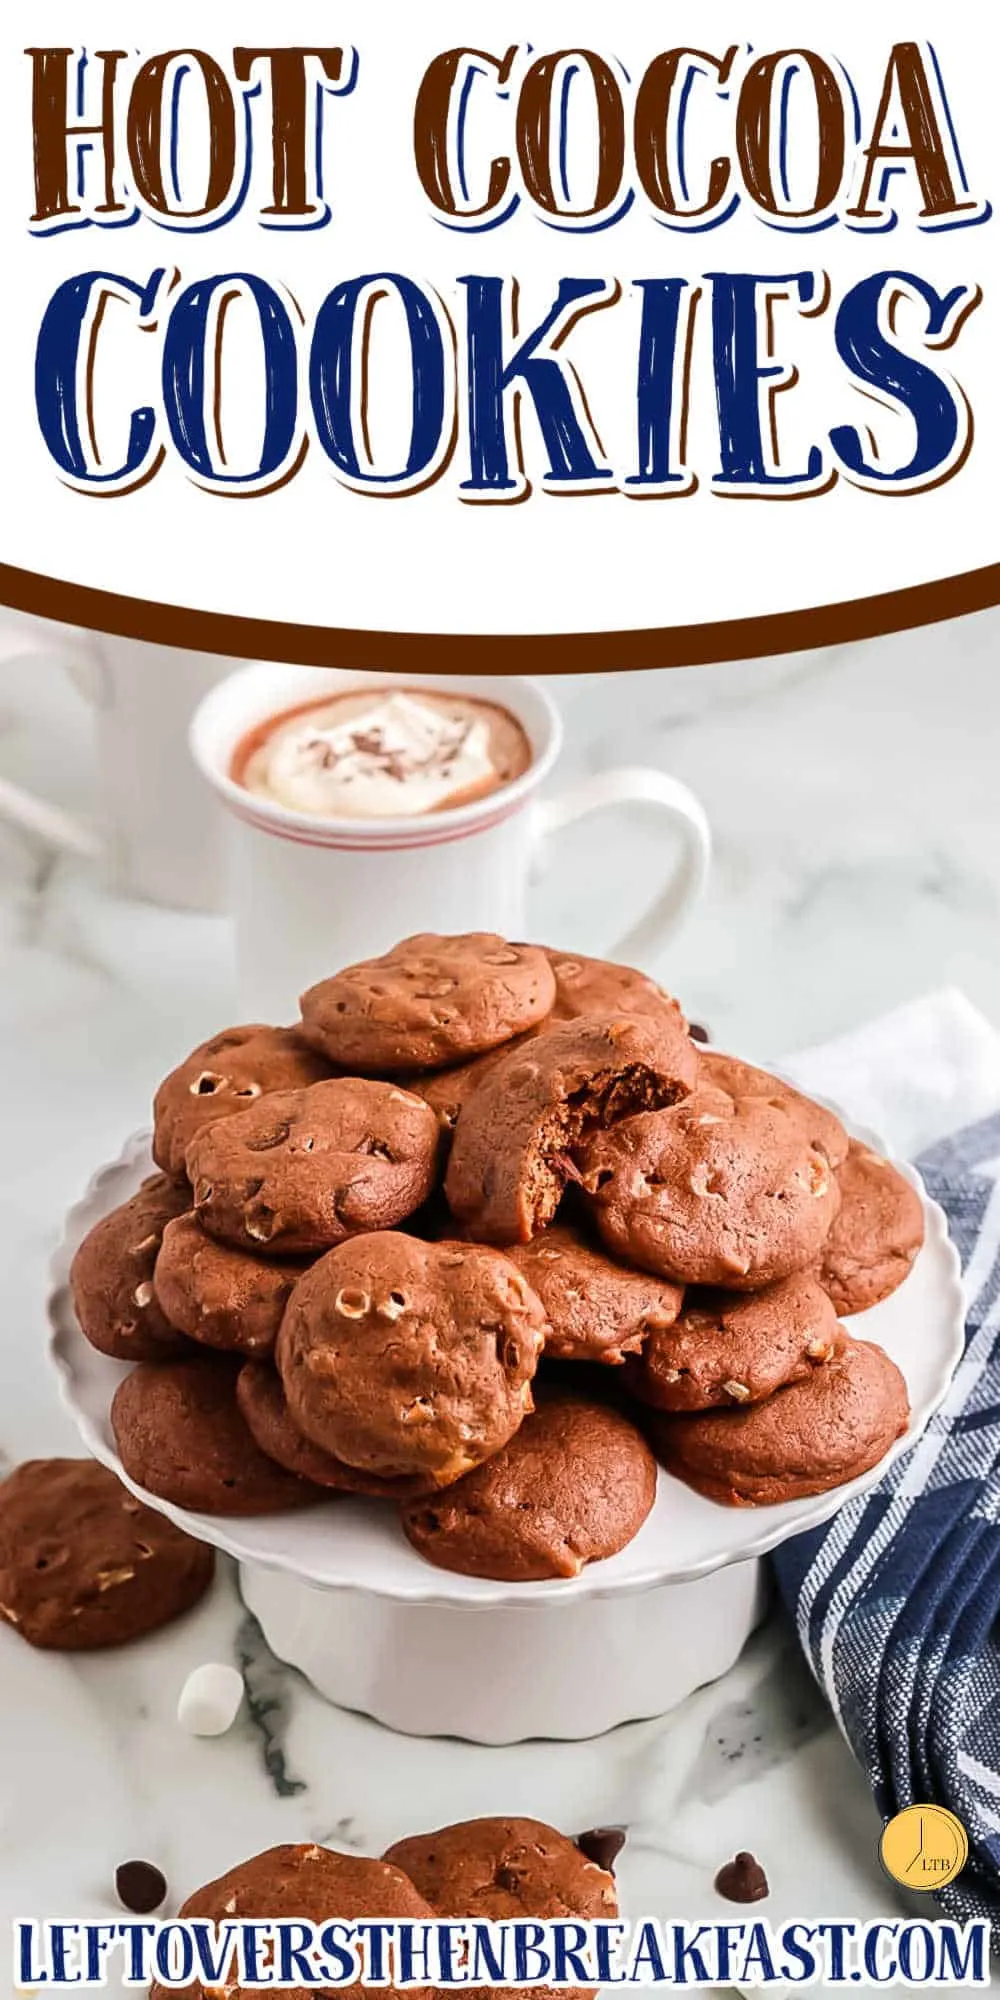 tray of cookies with text "hot cocoa cookies"